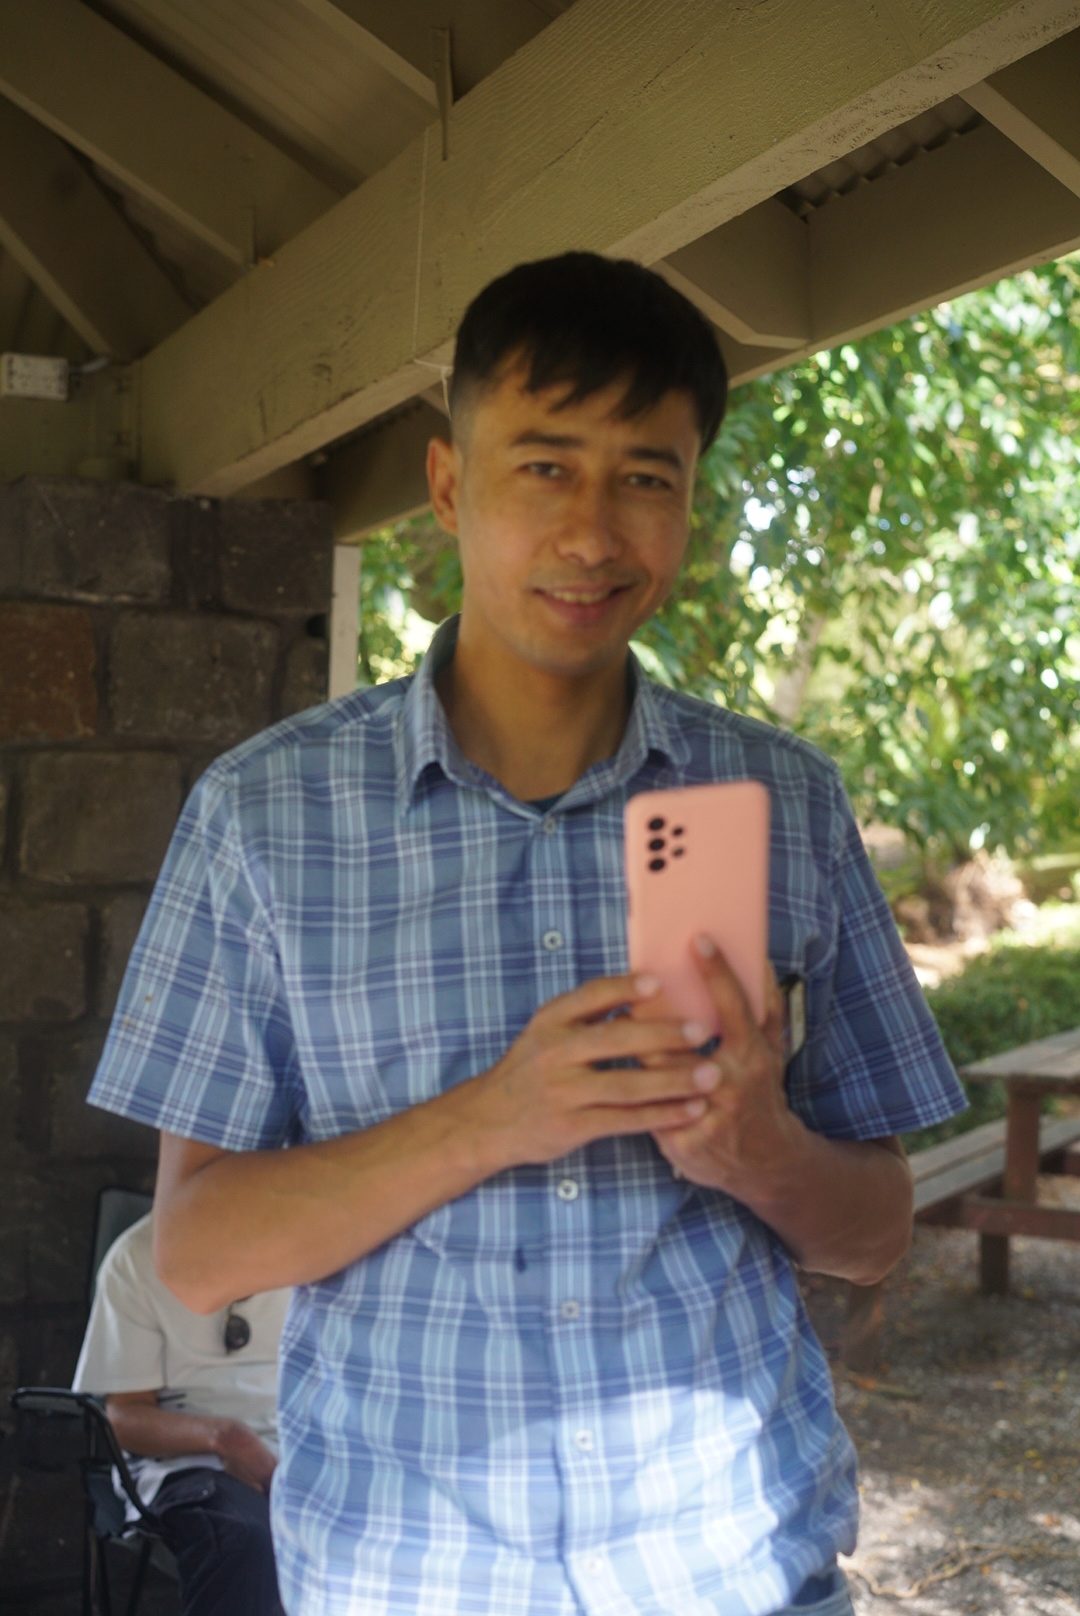 The Image Is Showing a Man Holding Smartphone.